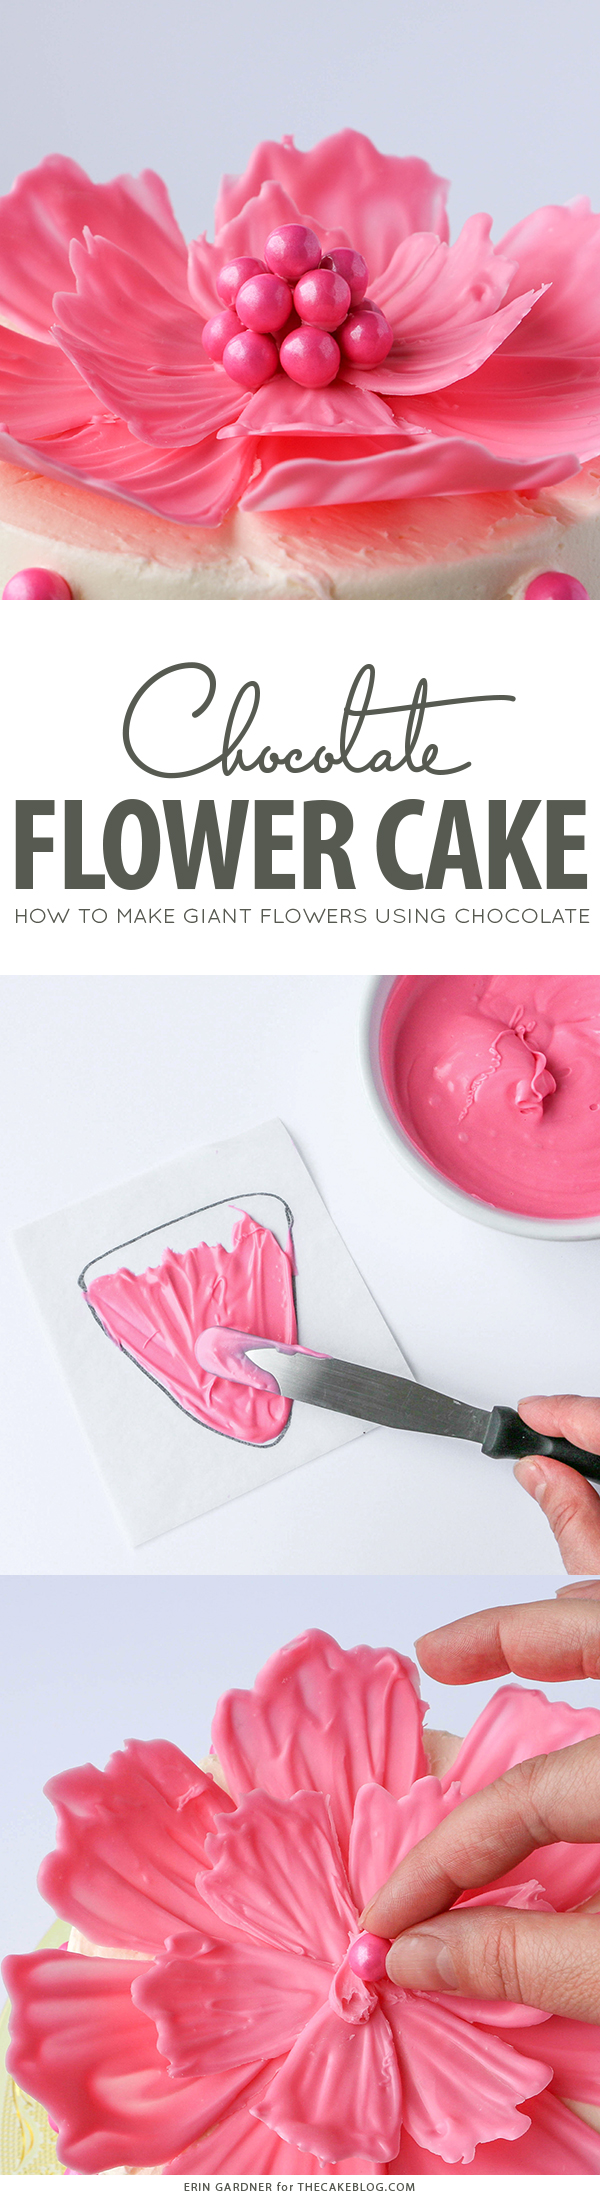 DIY Chocolate Flowers. How to make chocolate flowers to top cakes and cupcakes. | By Erin Gardner for TheCakeBlog.com